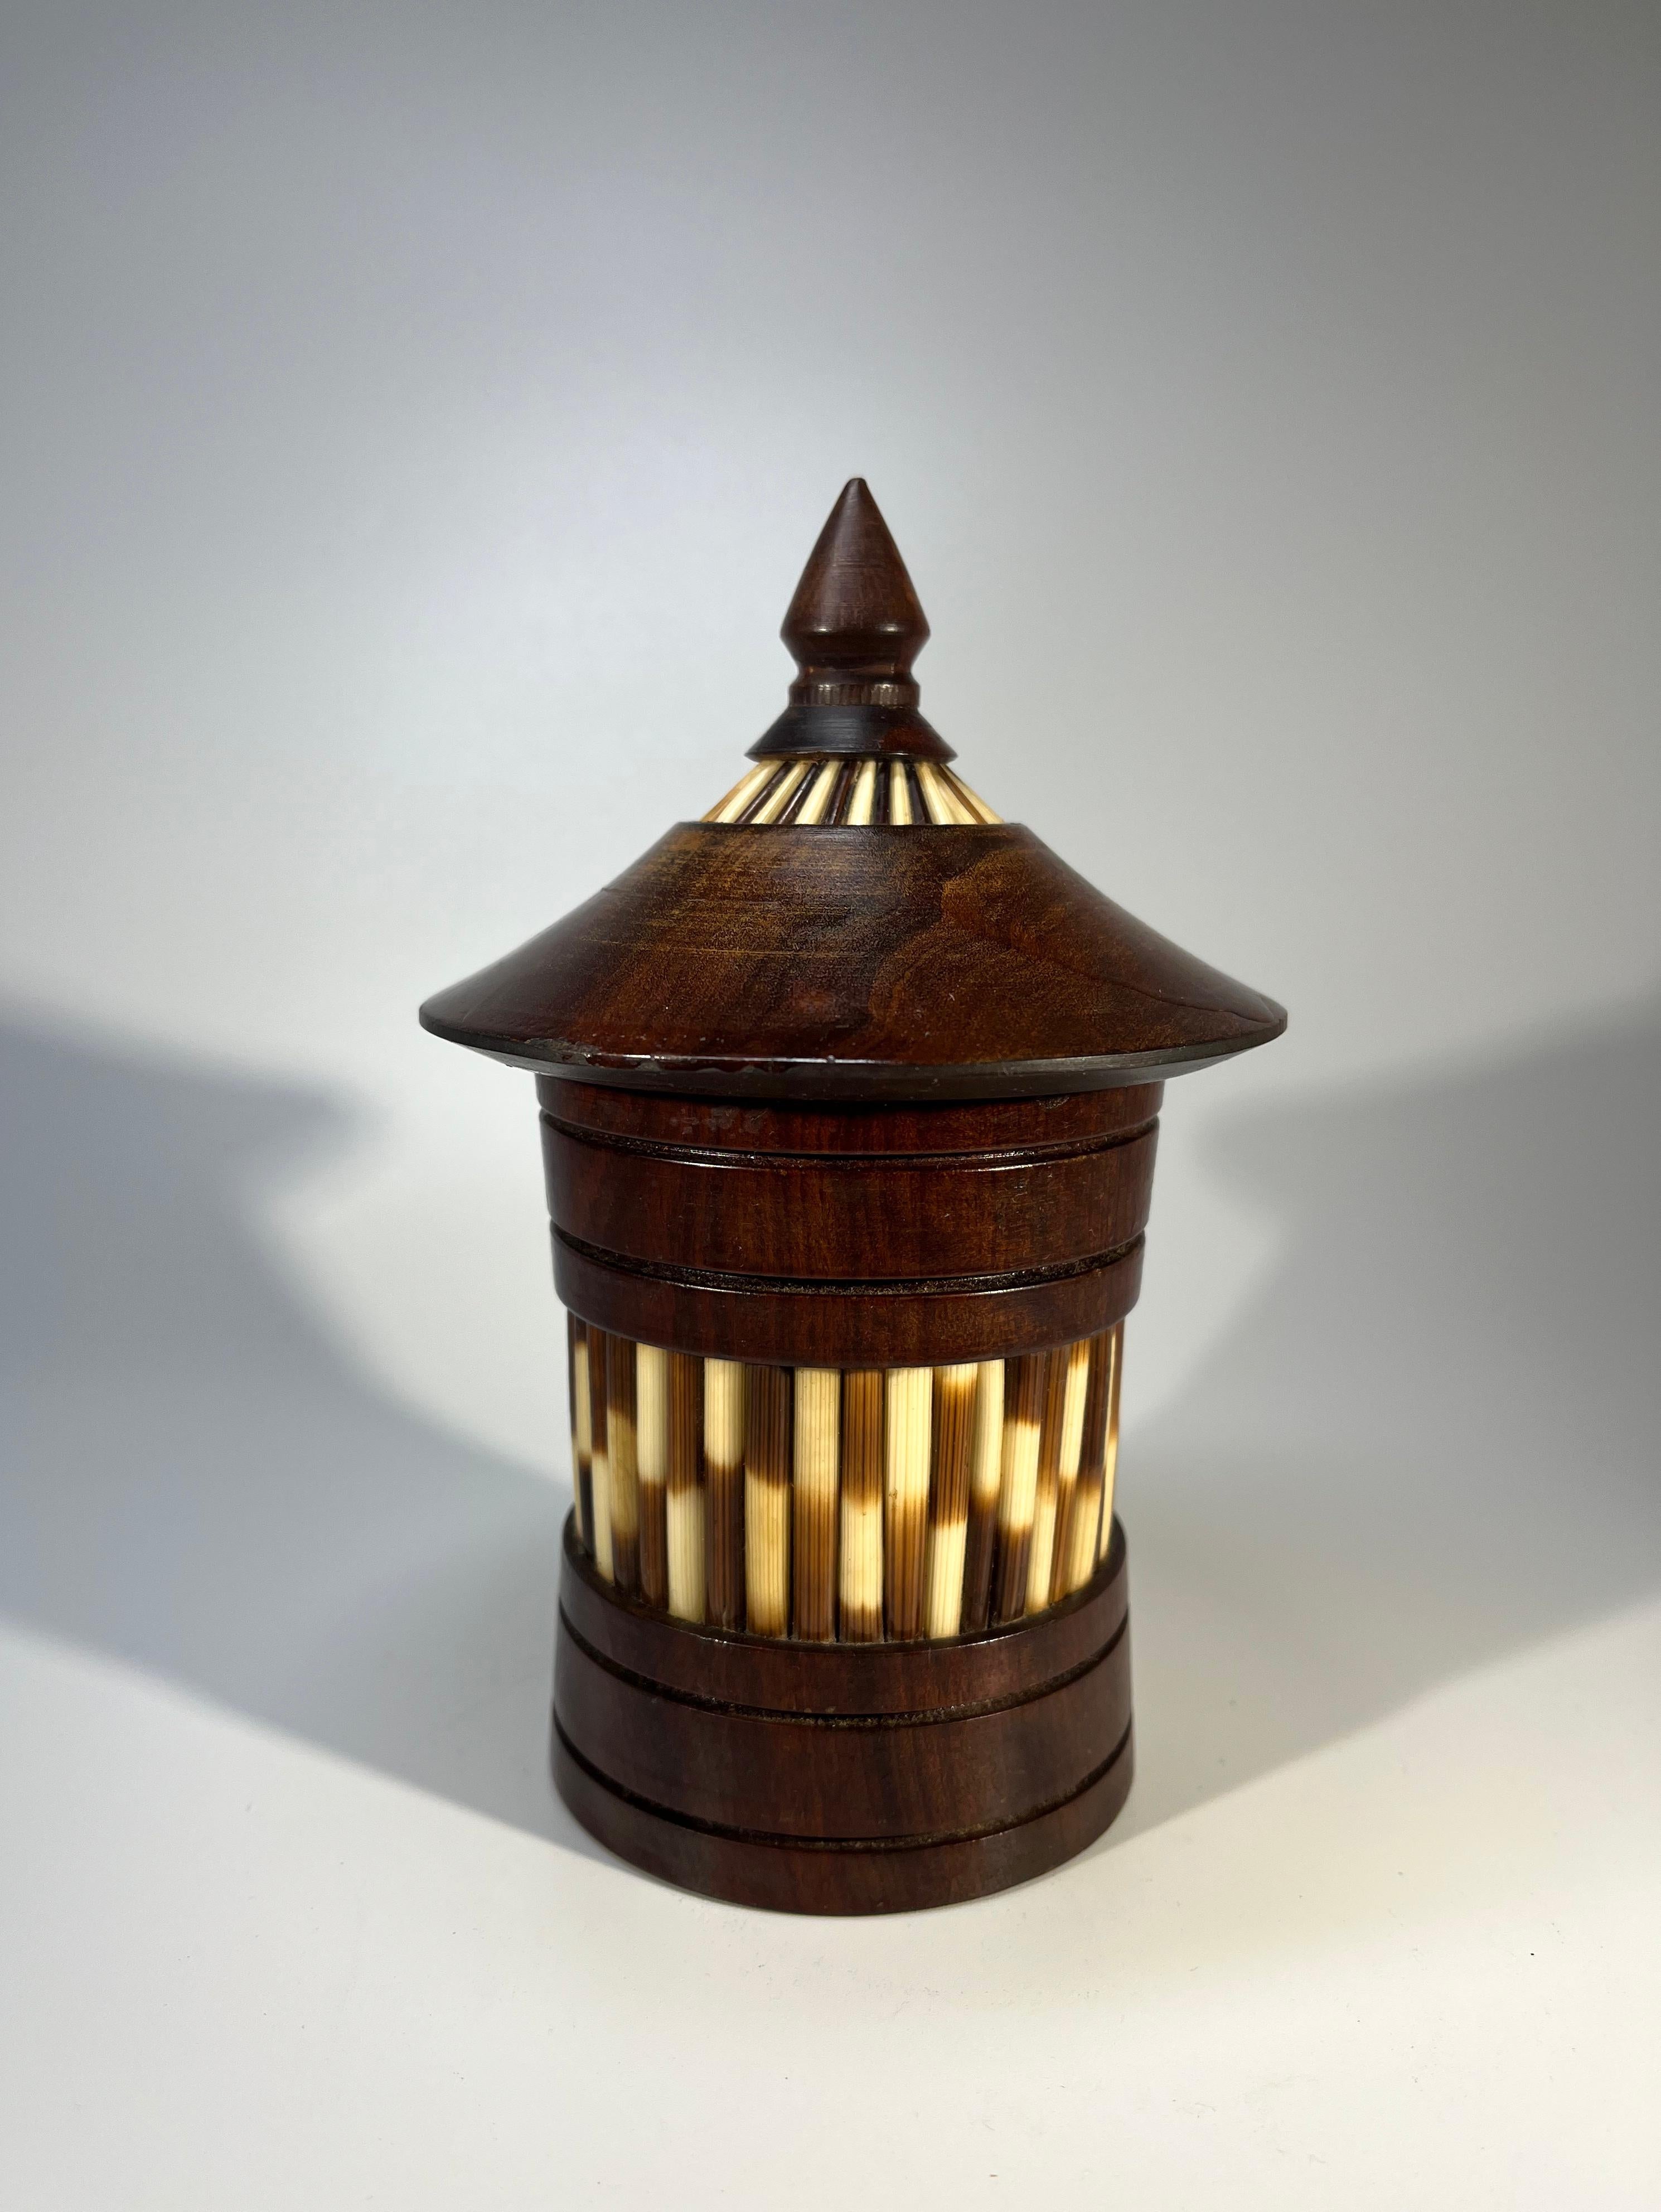 Sri Lankan Beautifully Styled Ceylonese Porcupine Quill, Lidded Dark Wood Conical Pot For Sale